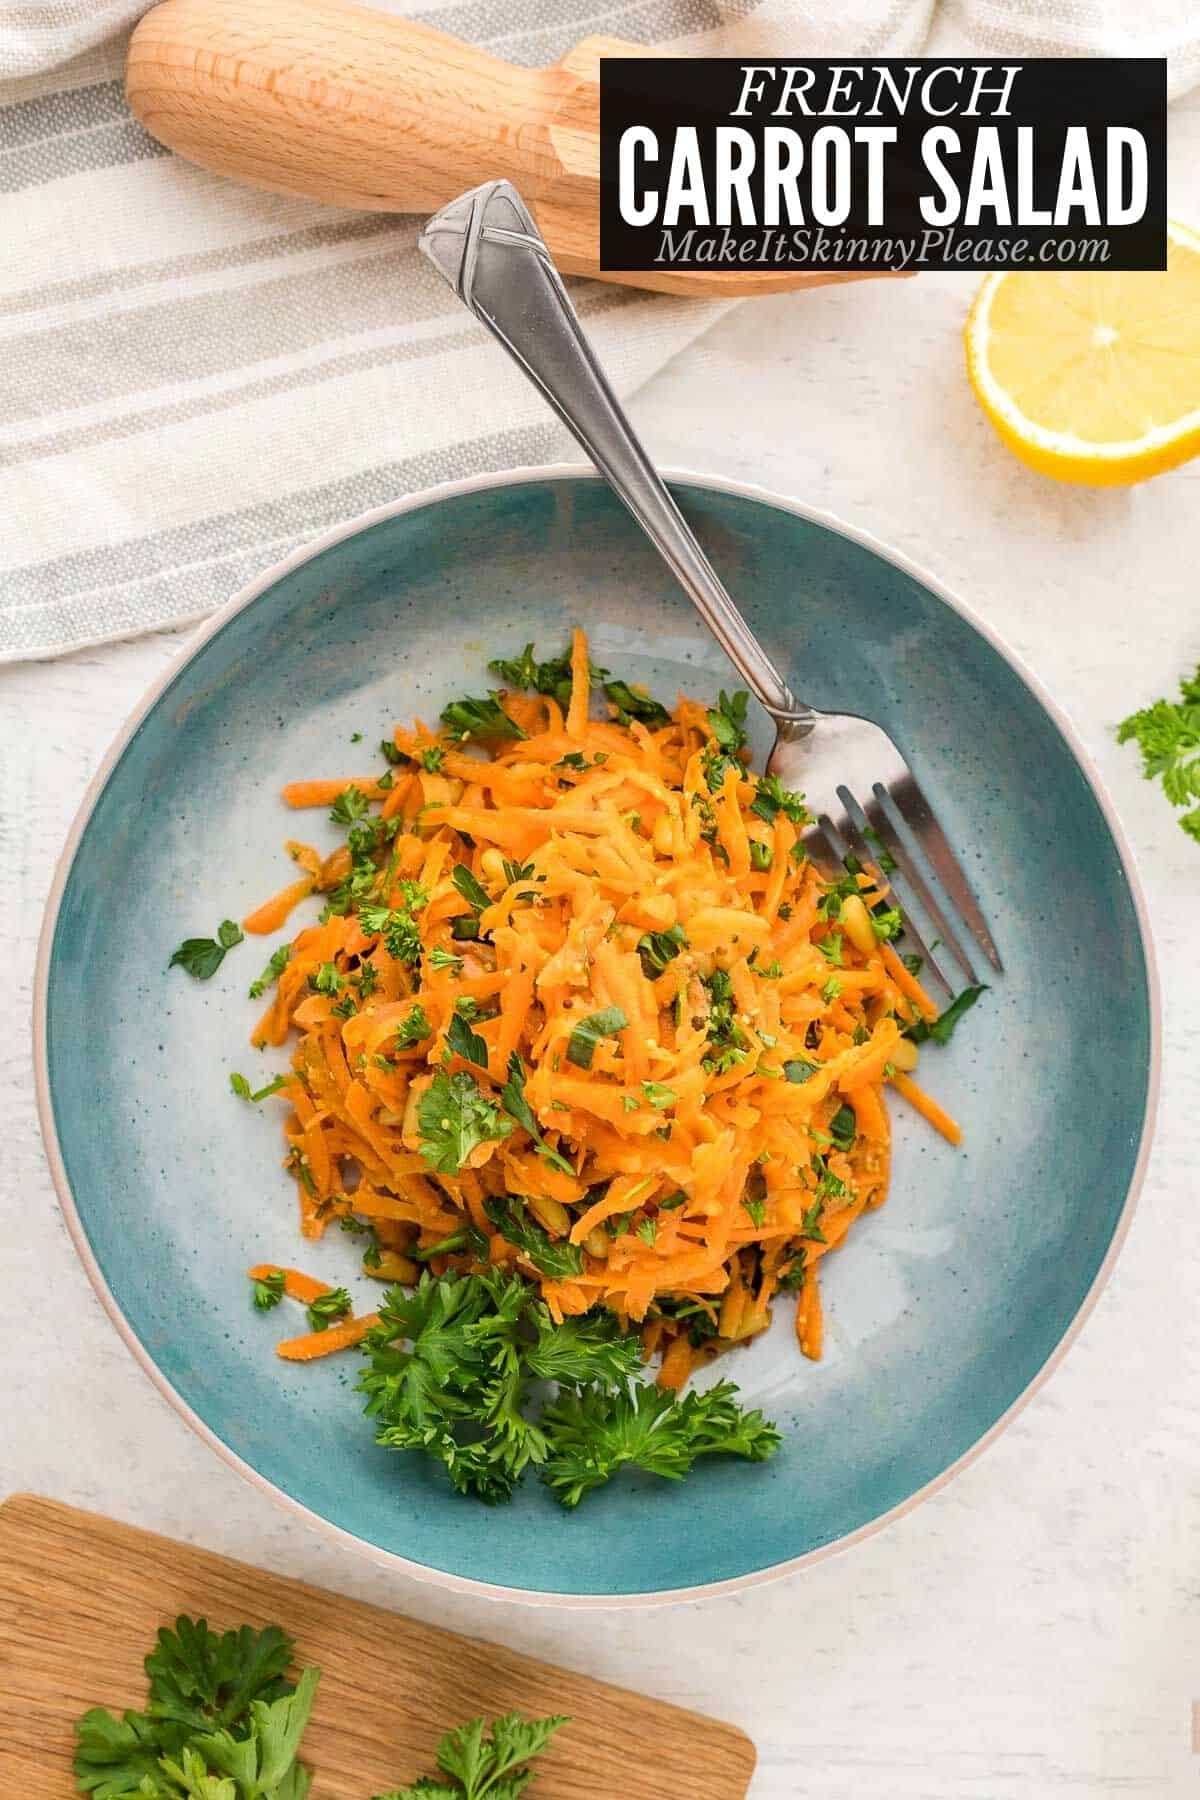 French Carrot Salad on blue plate.